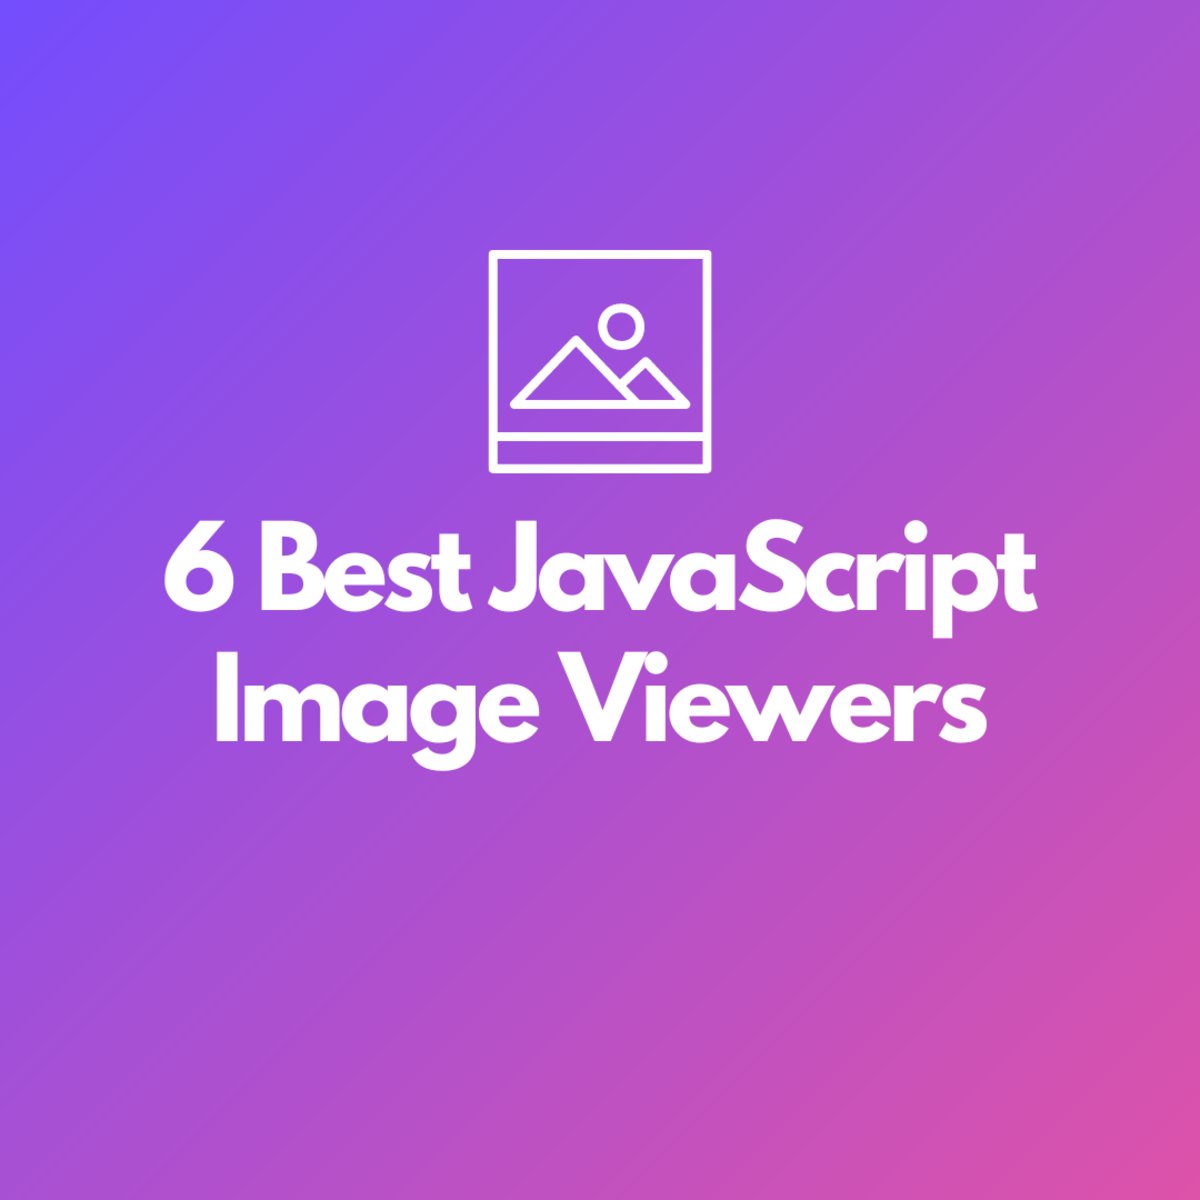 Discover some of the best JavaScript image viewers out there, all in this ultimate list!